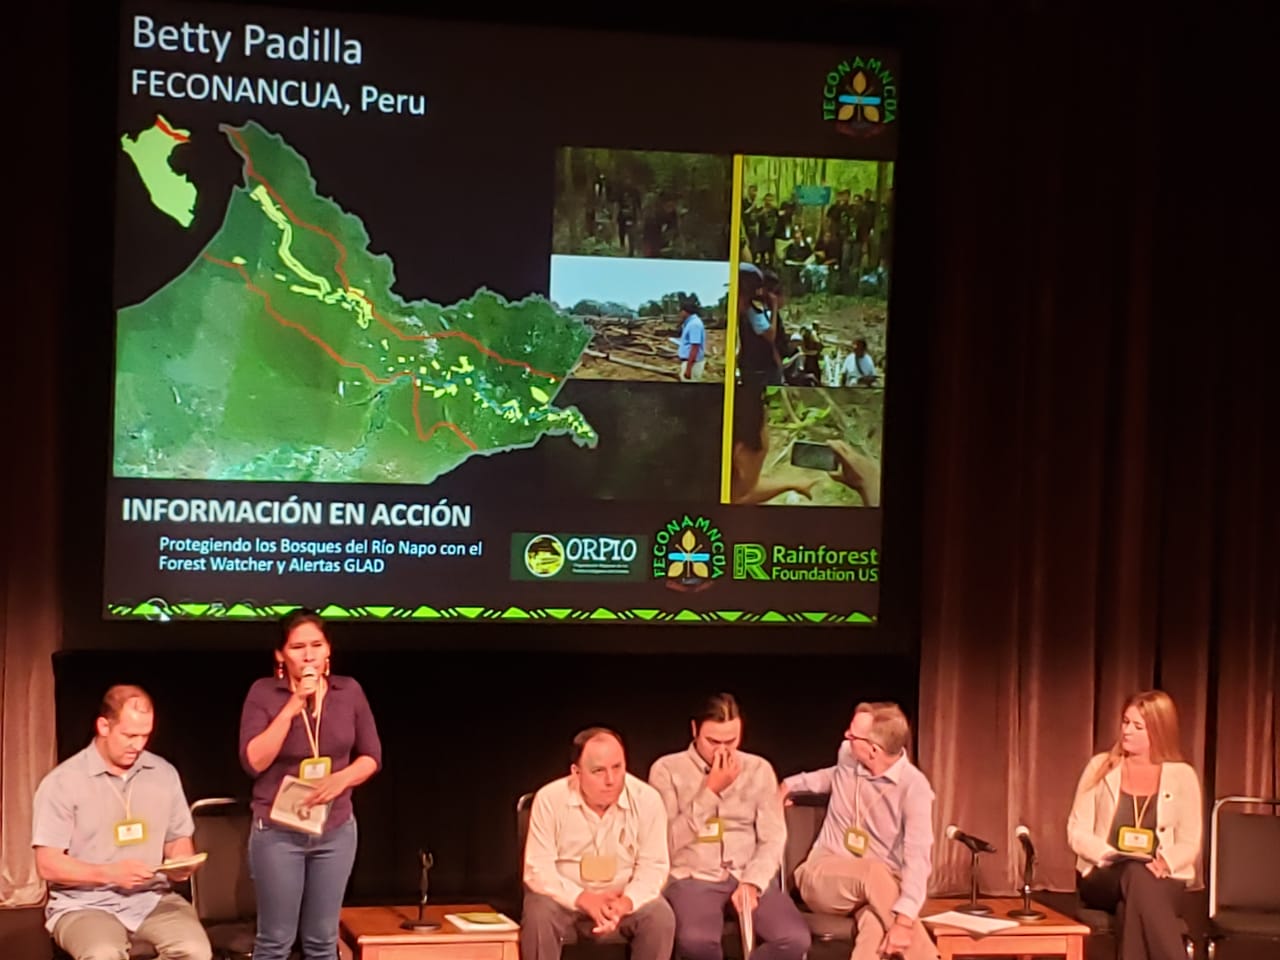 Peruvian Betty Padilla discussing deforestation at Global Forest Watch Summit.